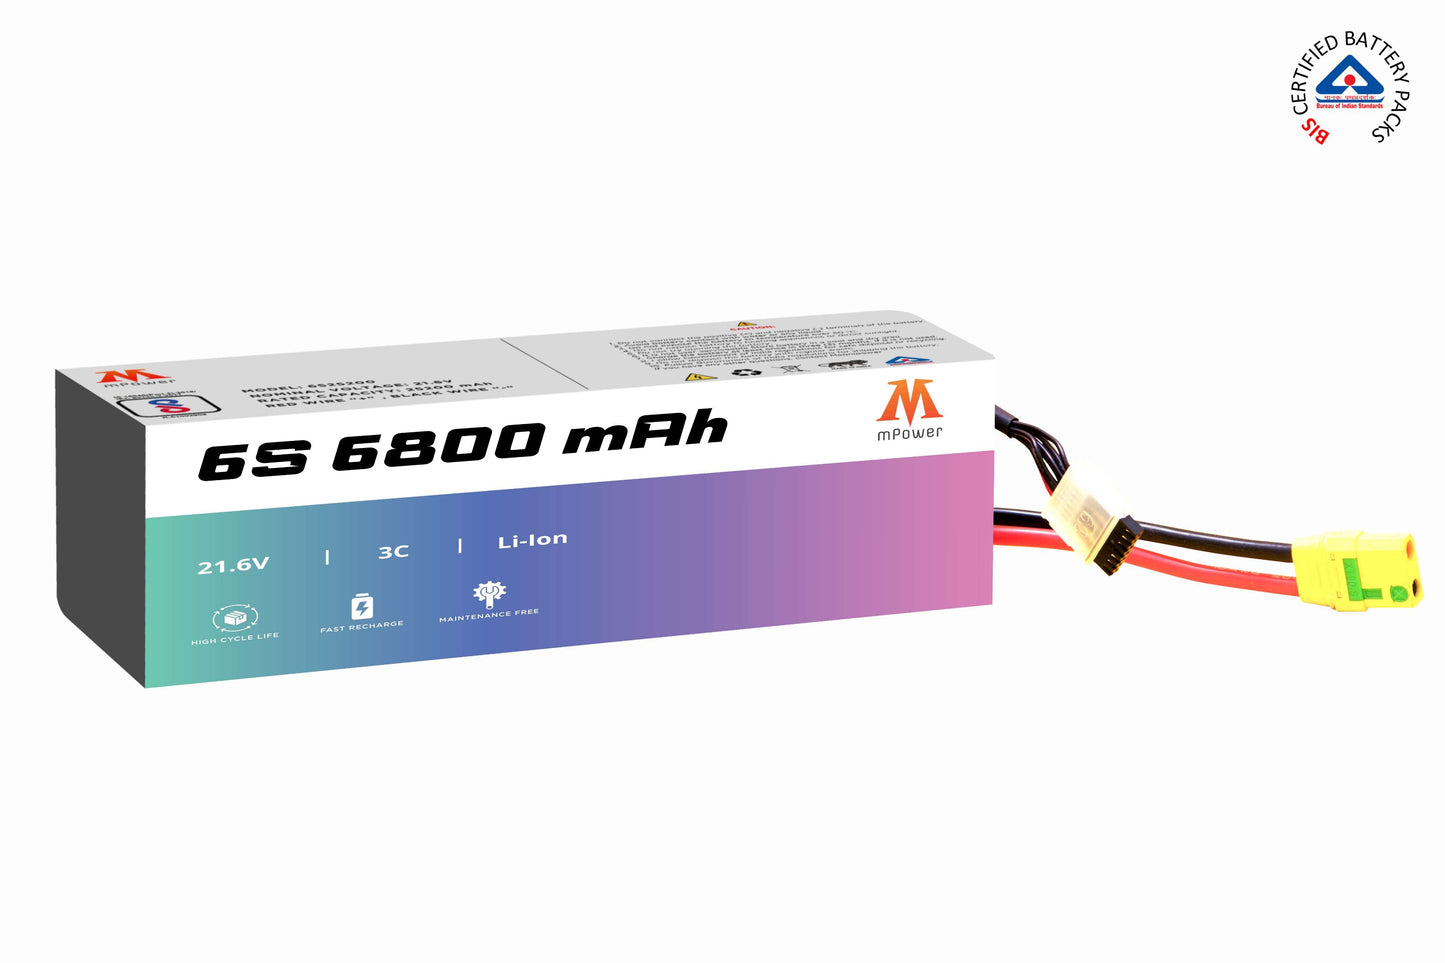 mPower 6S 6800mAh Lithium-Ion Battery for Surveillance Drones